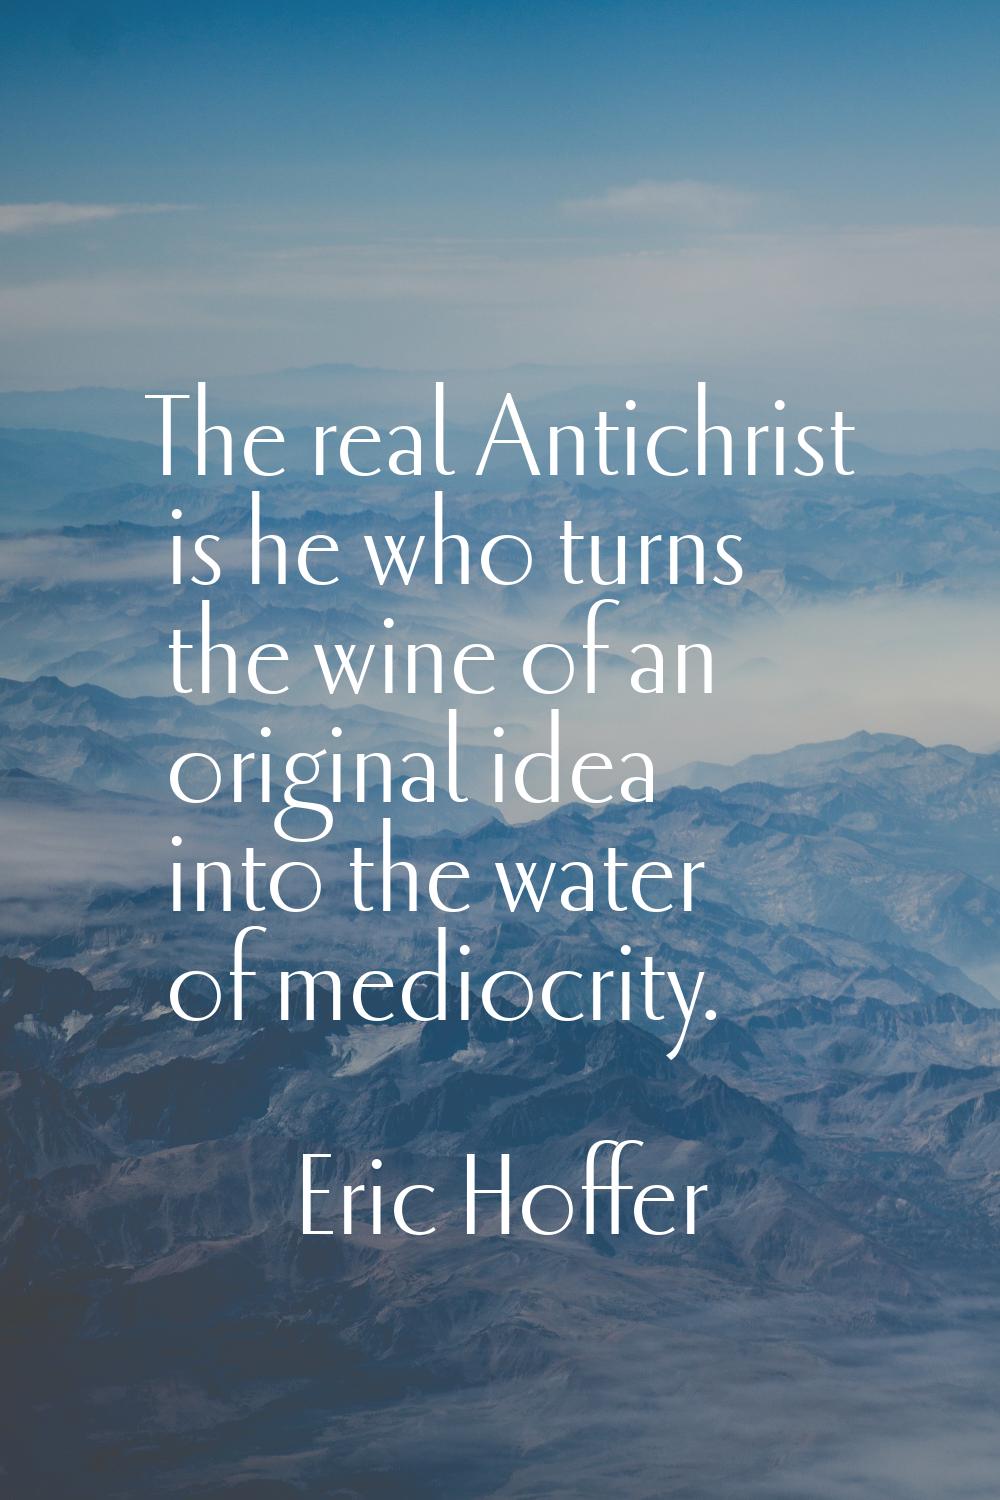 The real Antichrist is he who turns the wine of an original idea into the water of mediocrity.